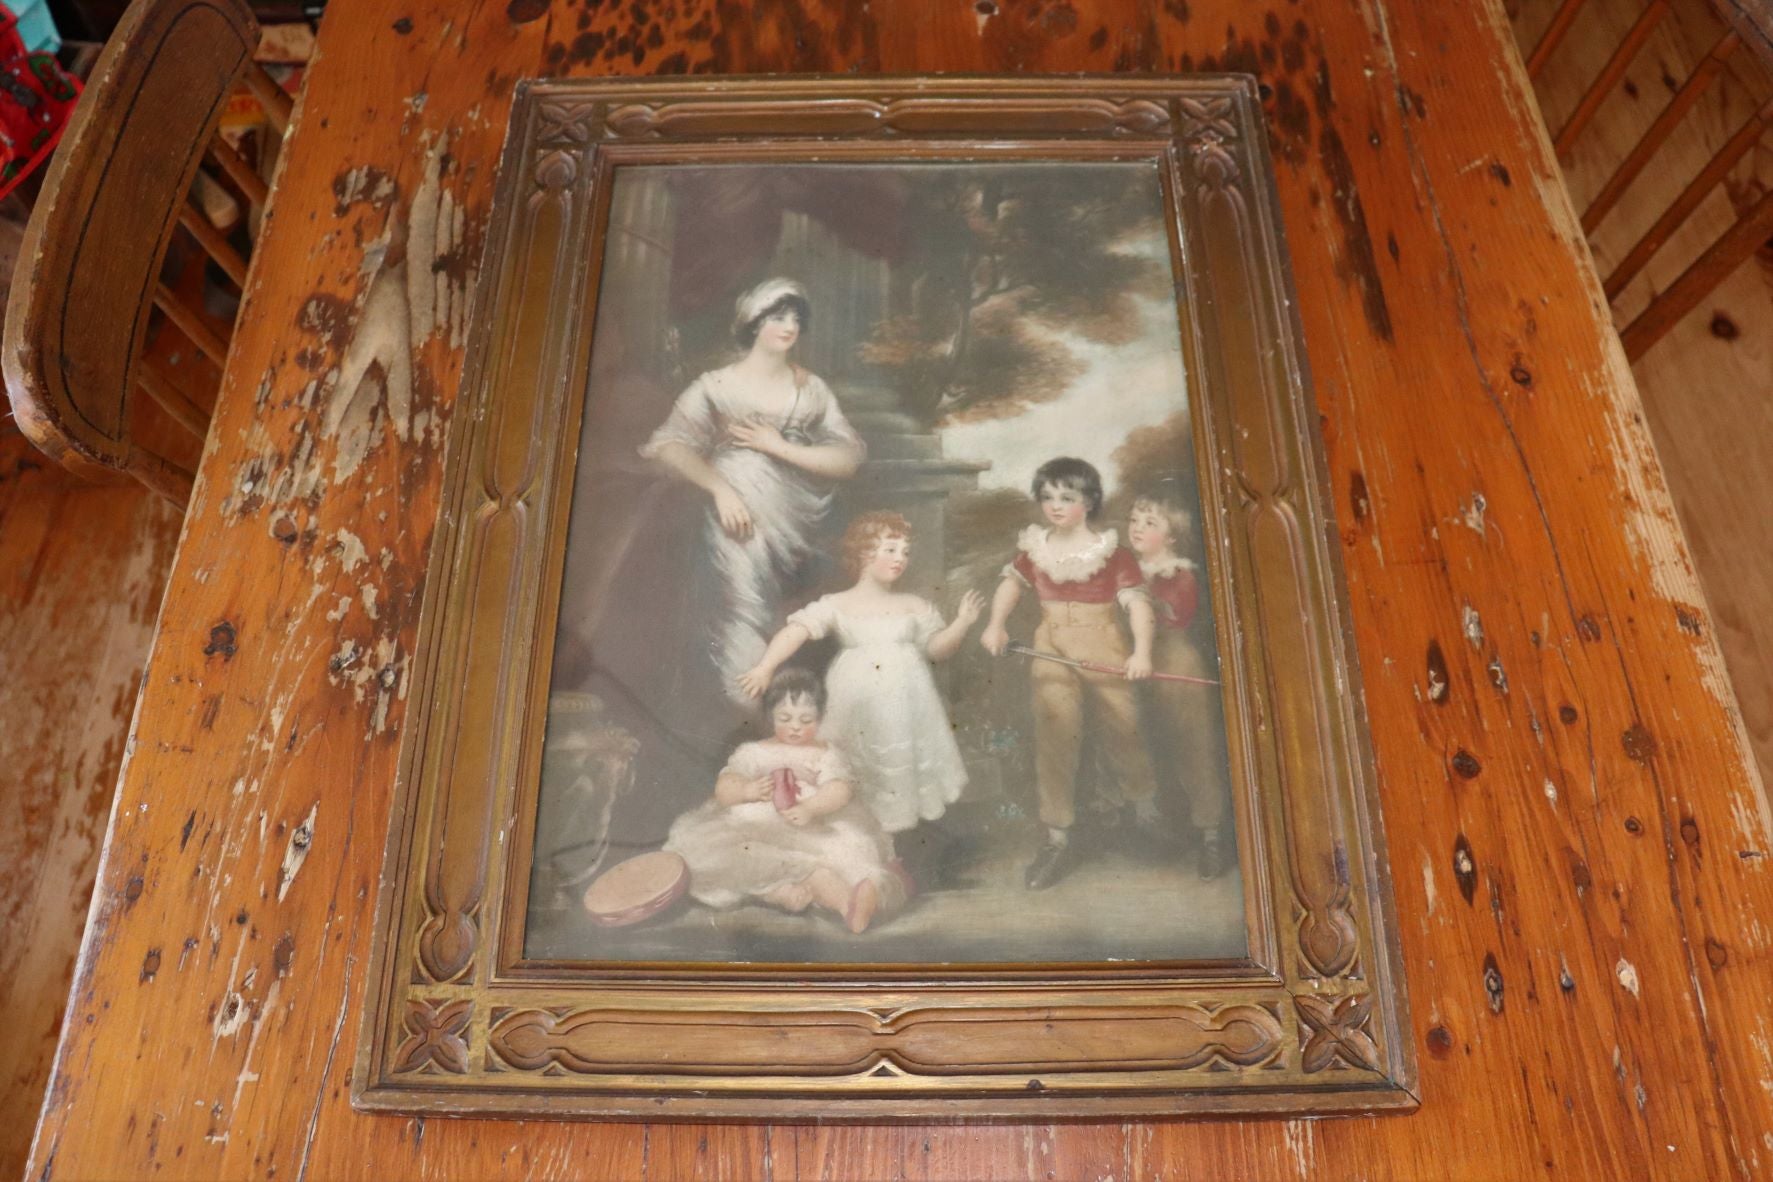 Old Print of Woman With Children In a Lovely Frame